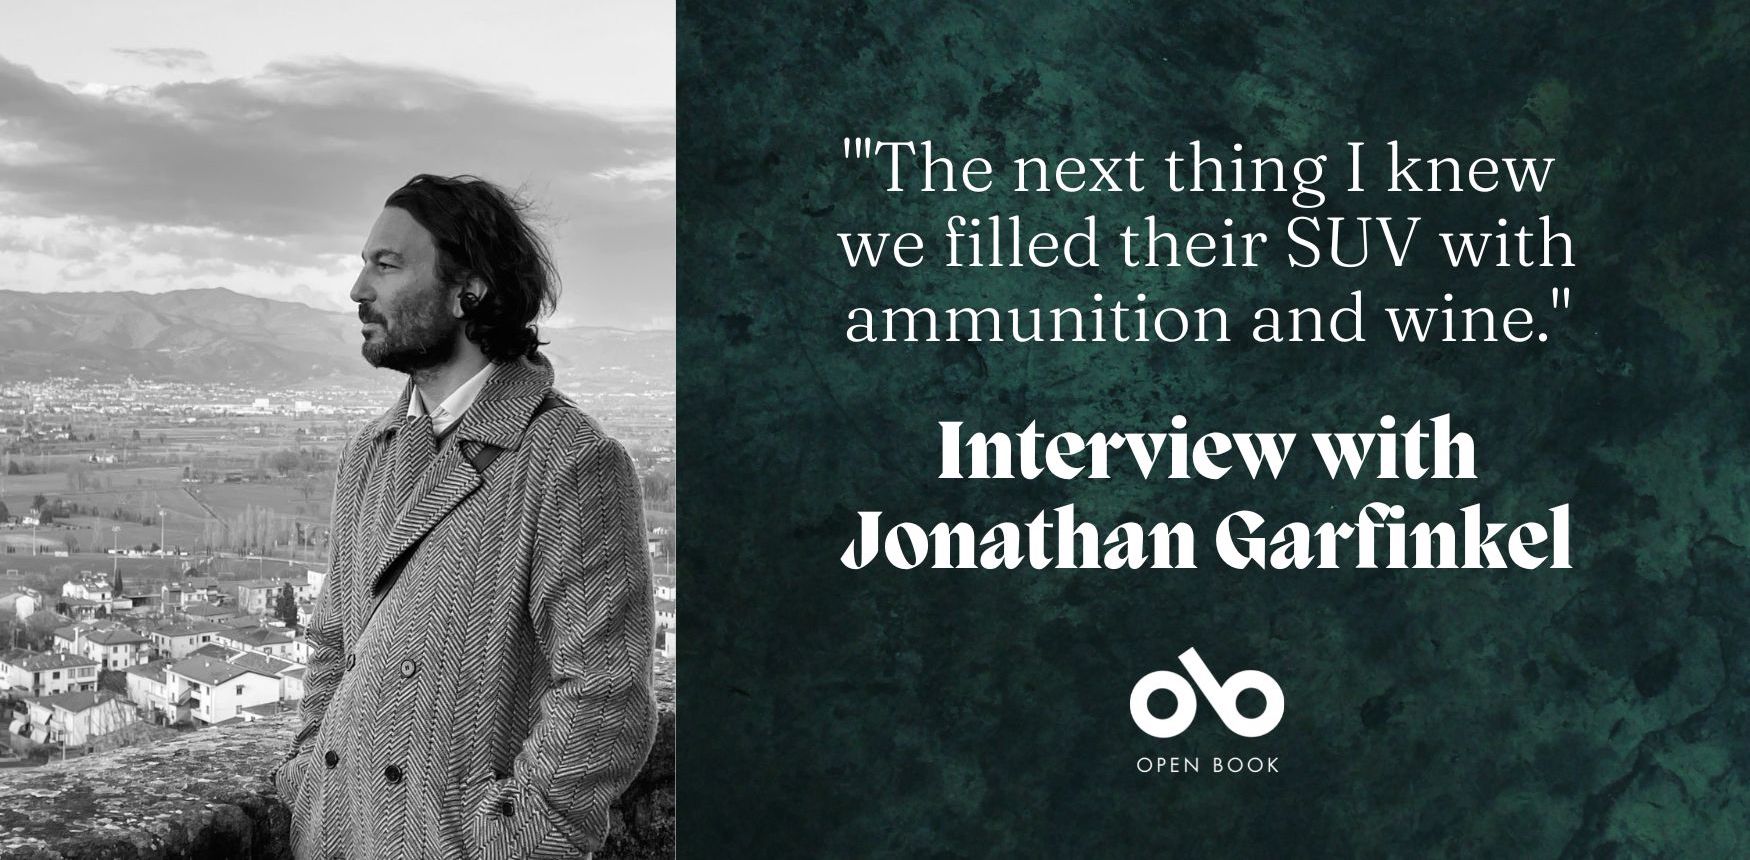 Image of author Jonathan Garfinkel looking over a city. Green background with text that reads "the next thing I knew we filled their SUV with ammunition and wine. Interview with Jonathan Garfinkel"